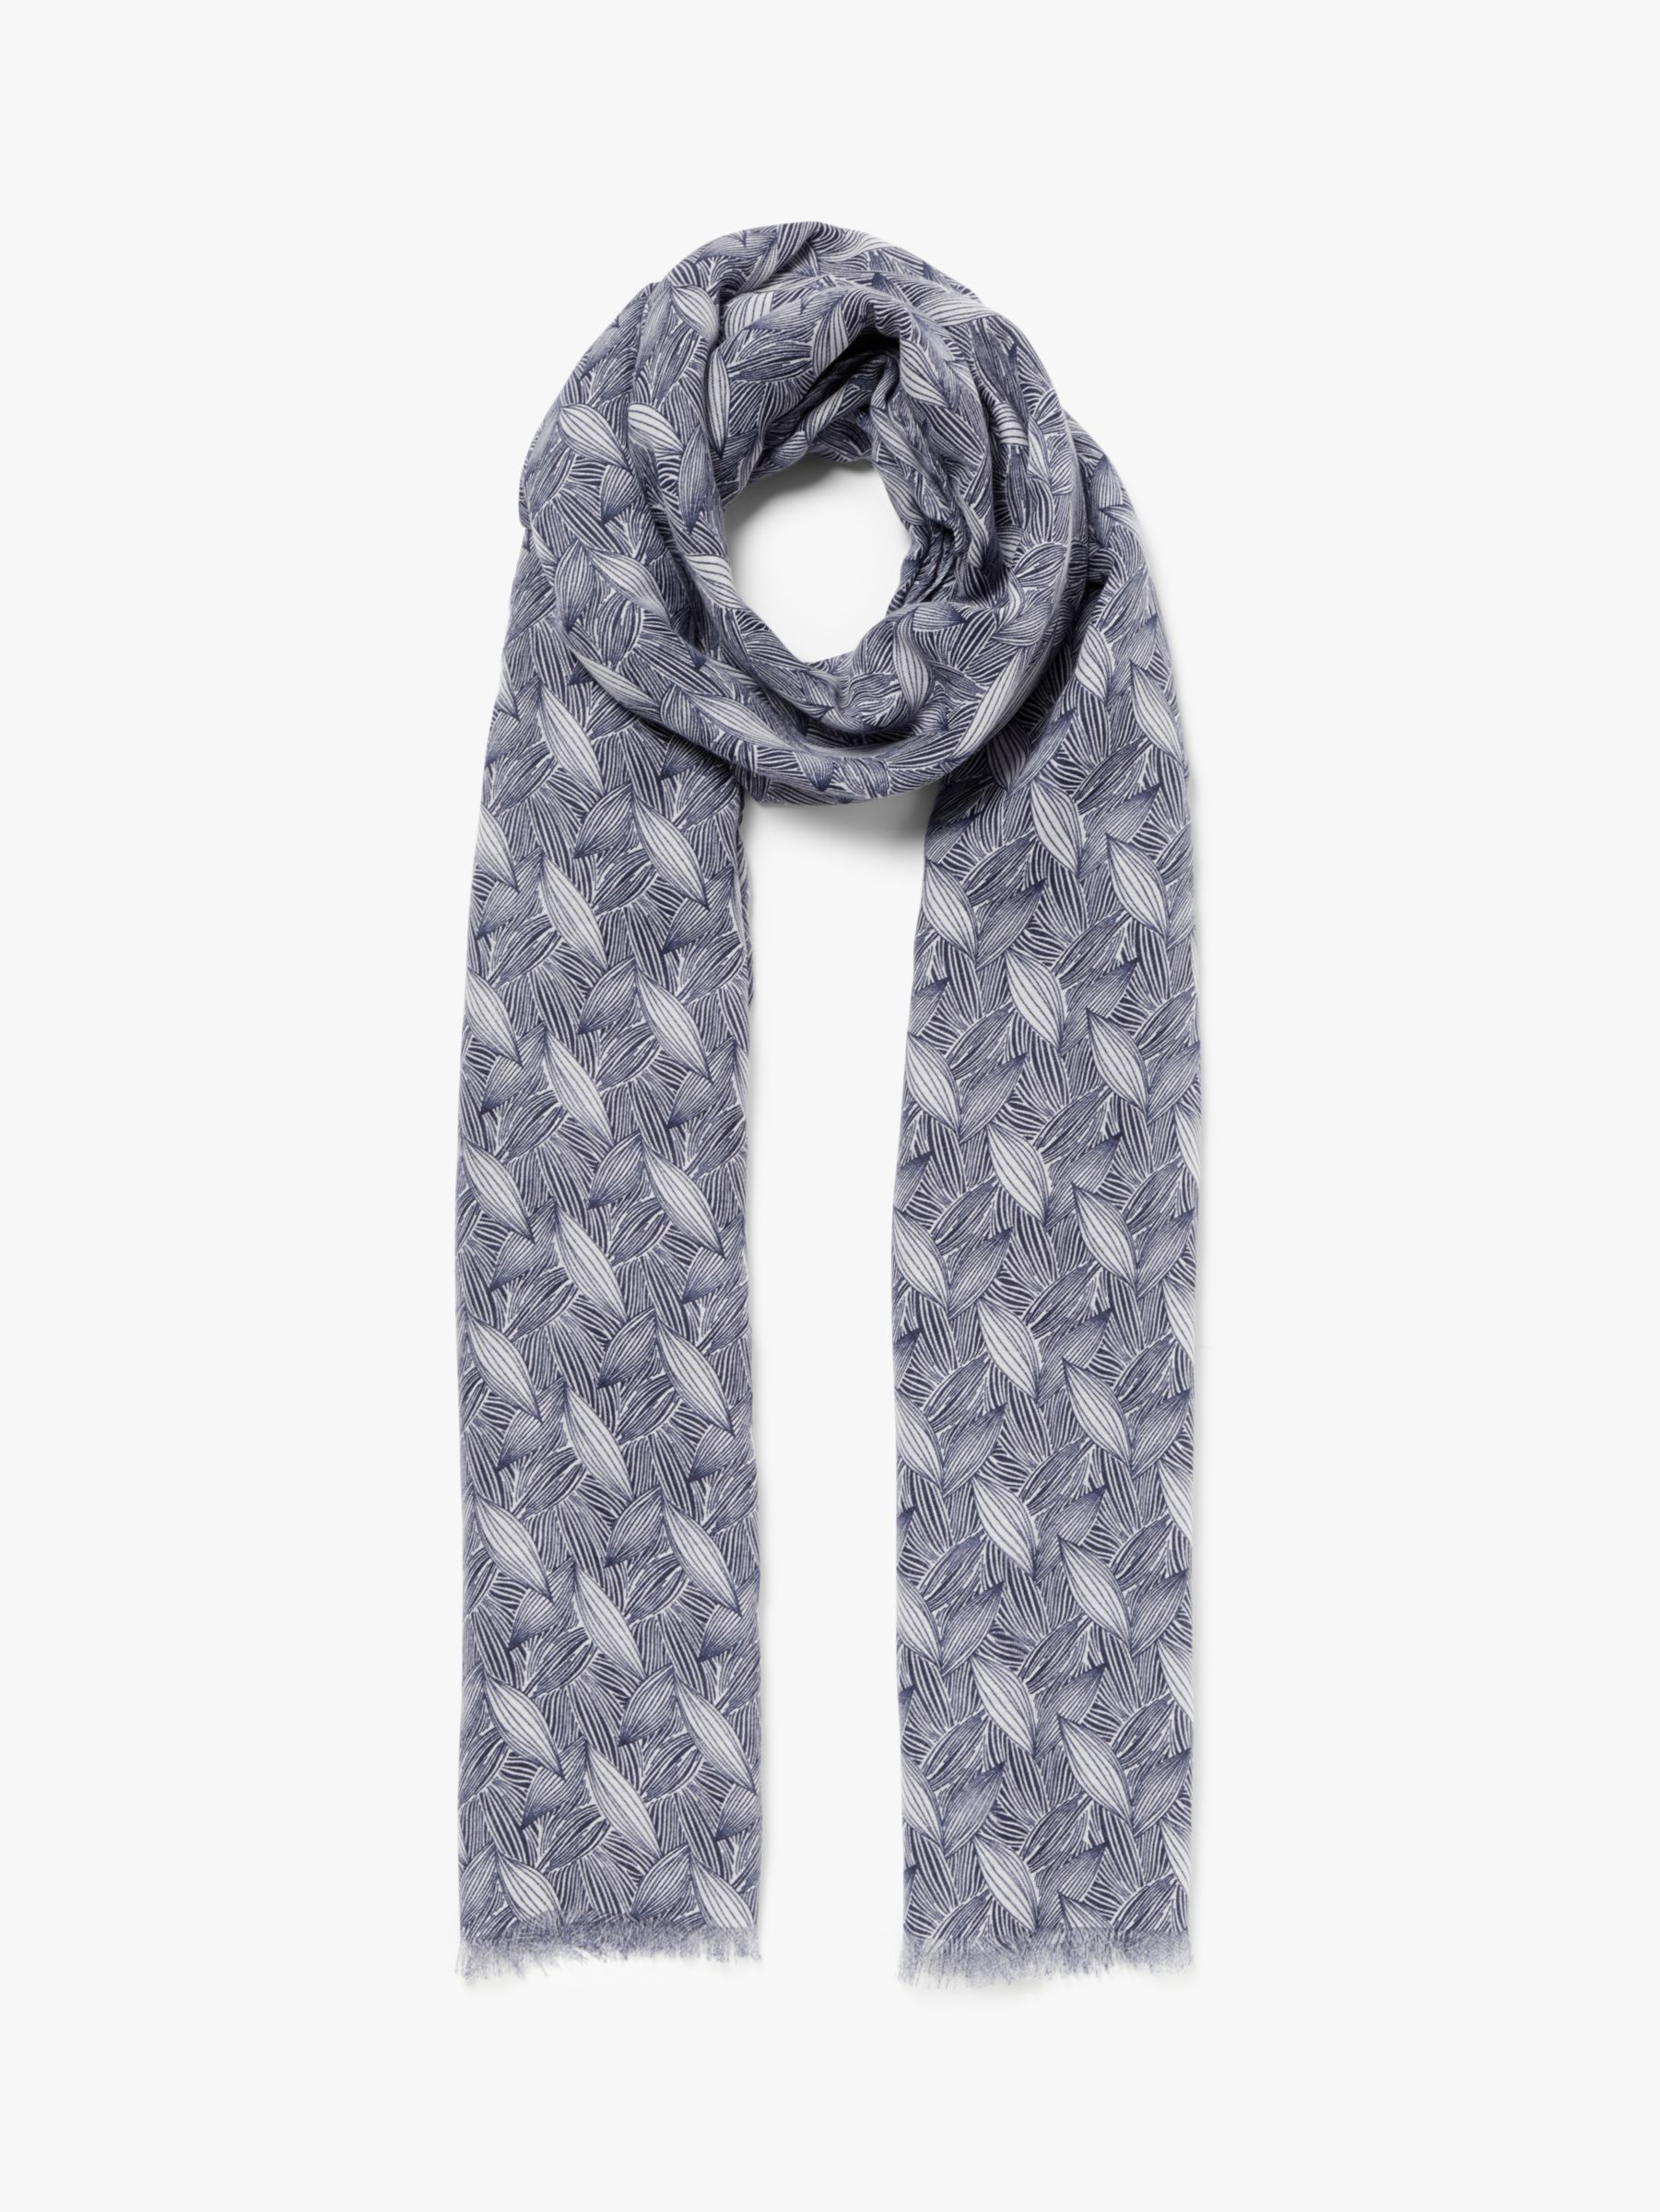 John Lewis & Partners Spiced Petals Print Scarf, Navy/White